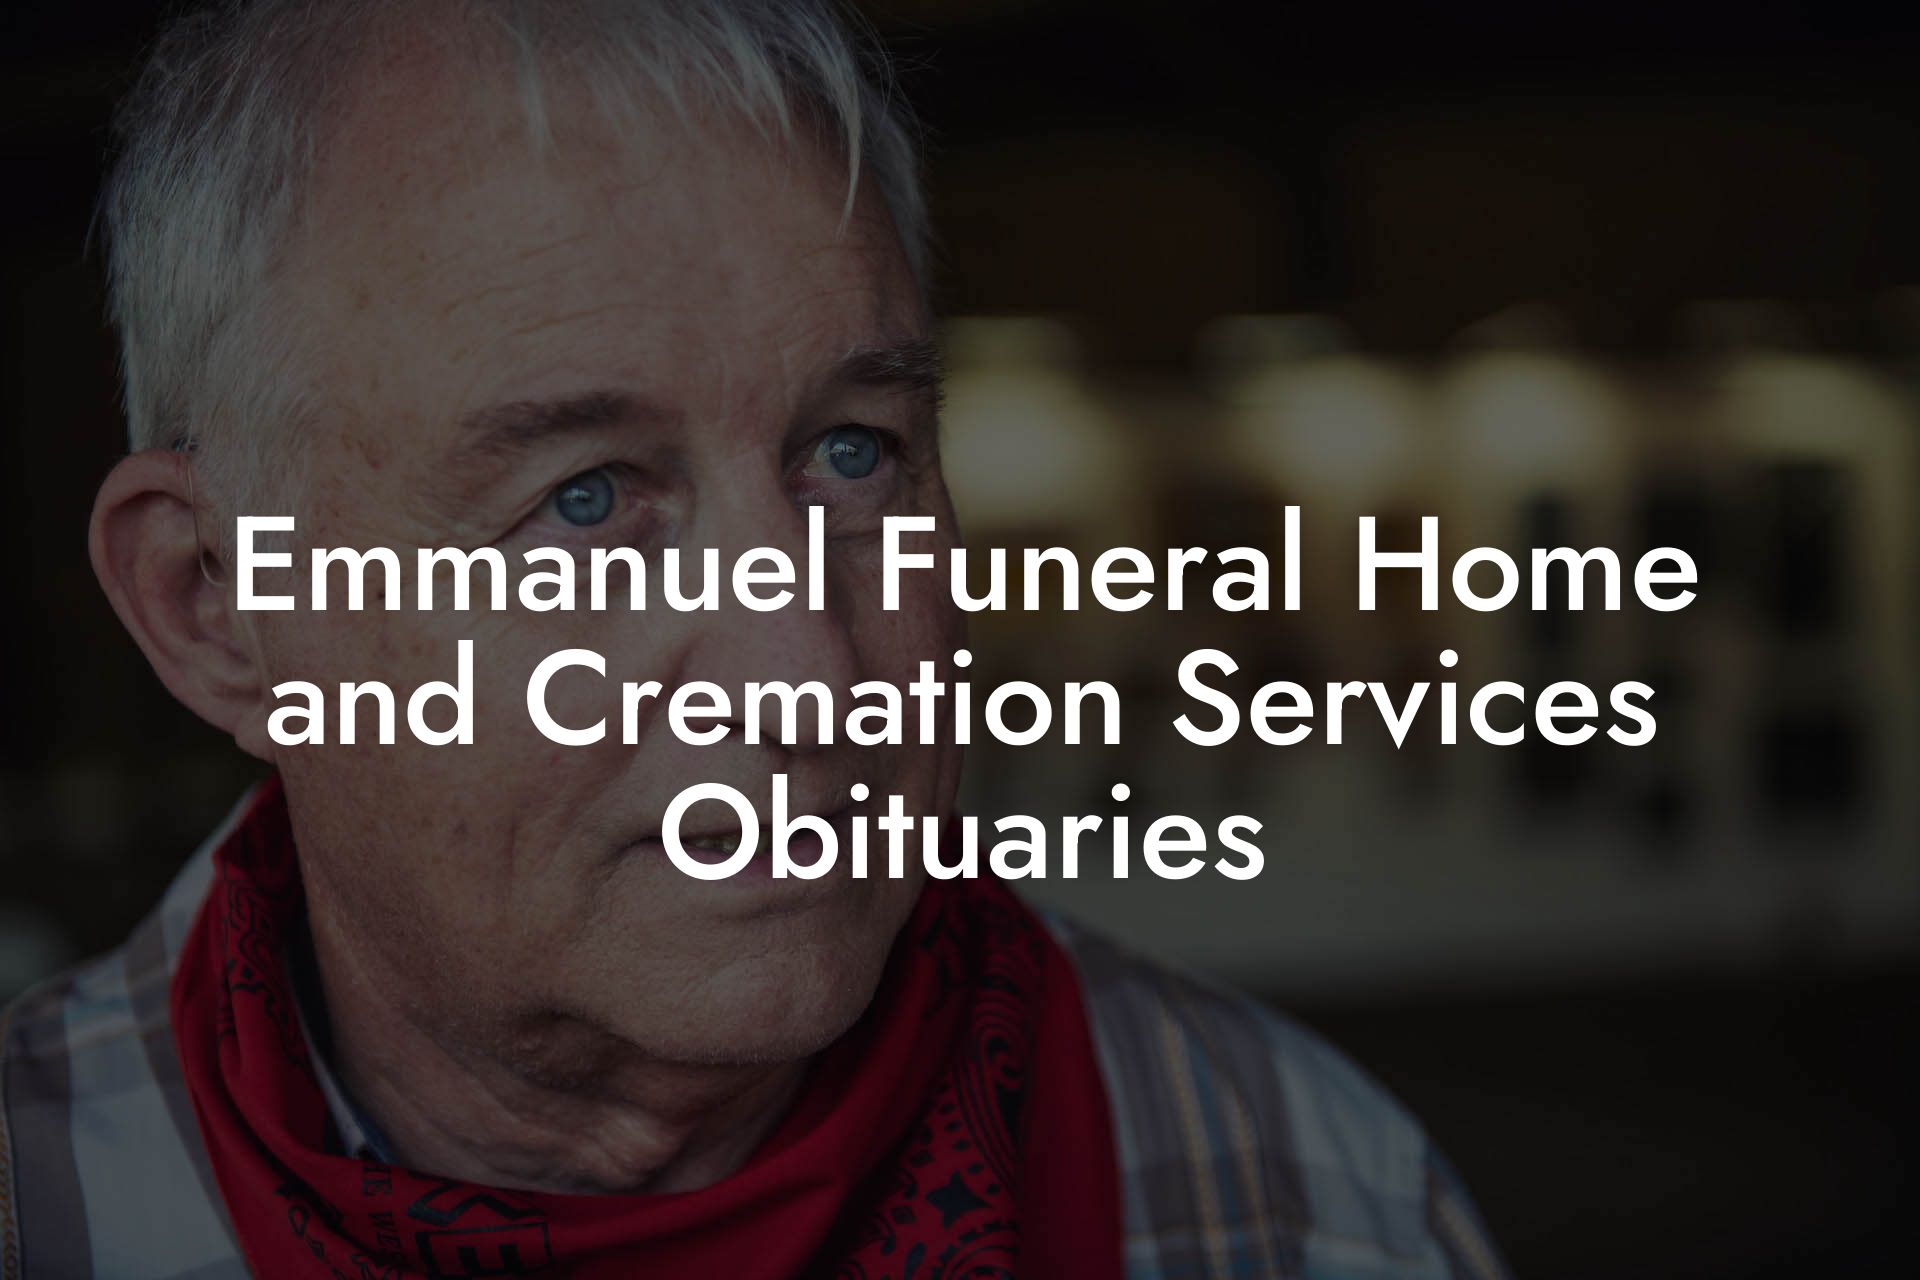 Emmanuel Funeral Home and Cremation Services Obituaries